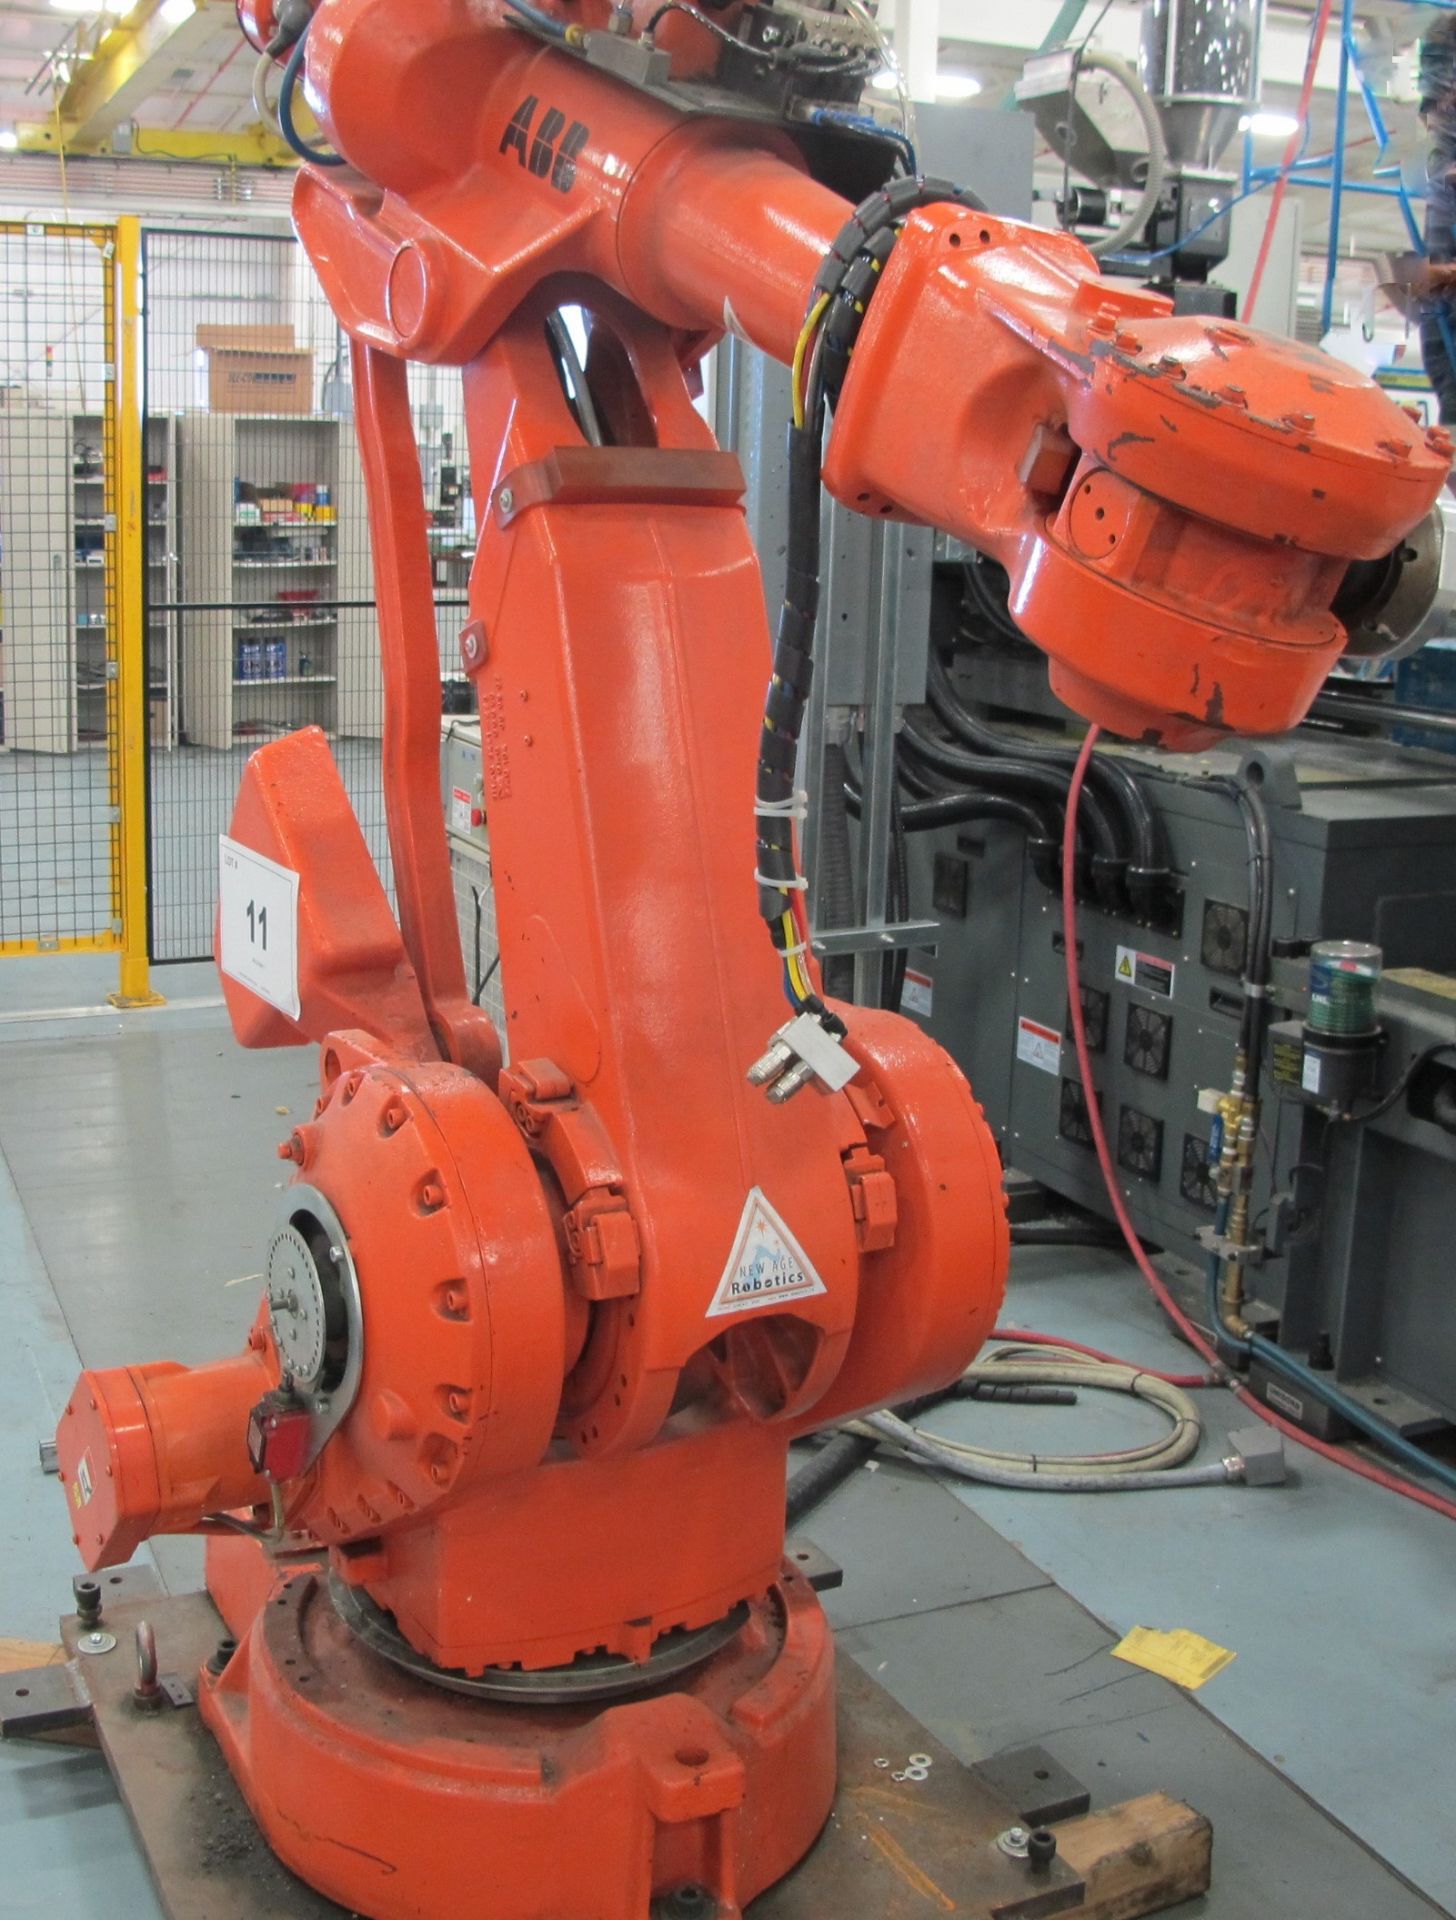 2002 ABB IRB4400 6 AXIS ROBOT, S/N 0716.12977120-012, W/CONTROL PANEL AND PENDANT CONTROL - Image 3 of 4